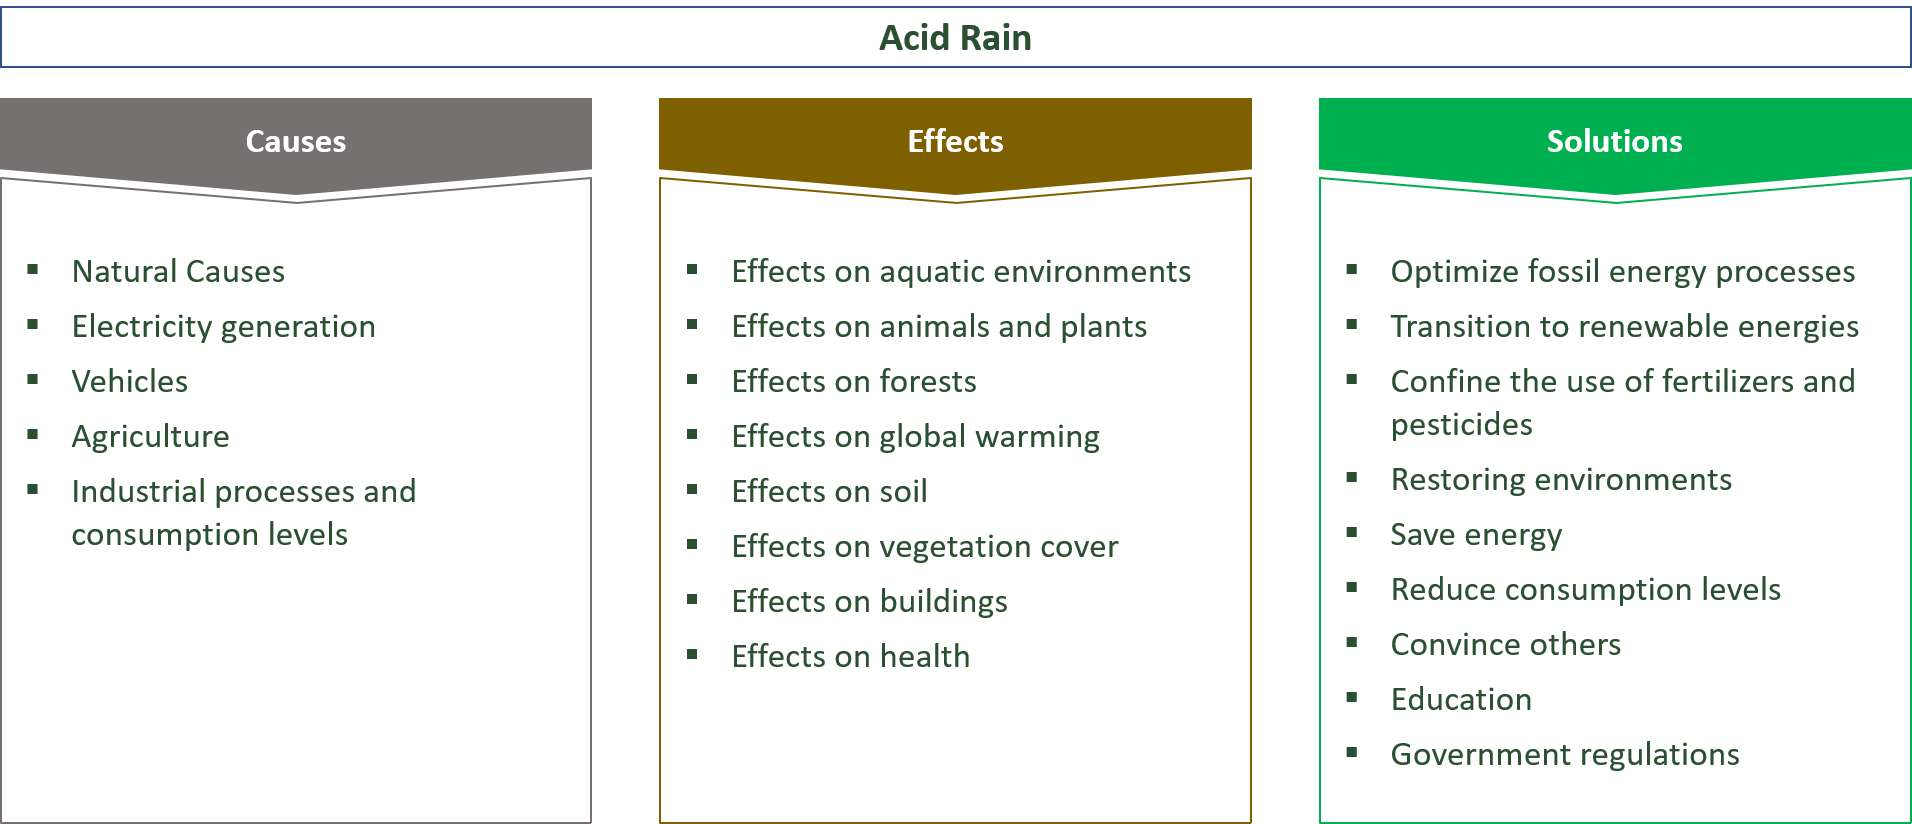 the causes, effects and solutions for acid rain